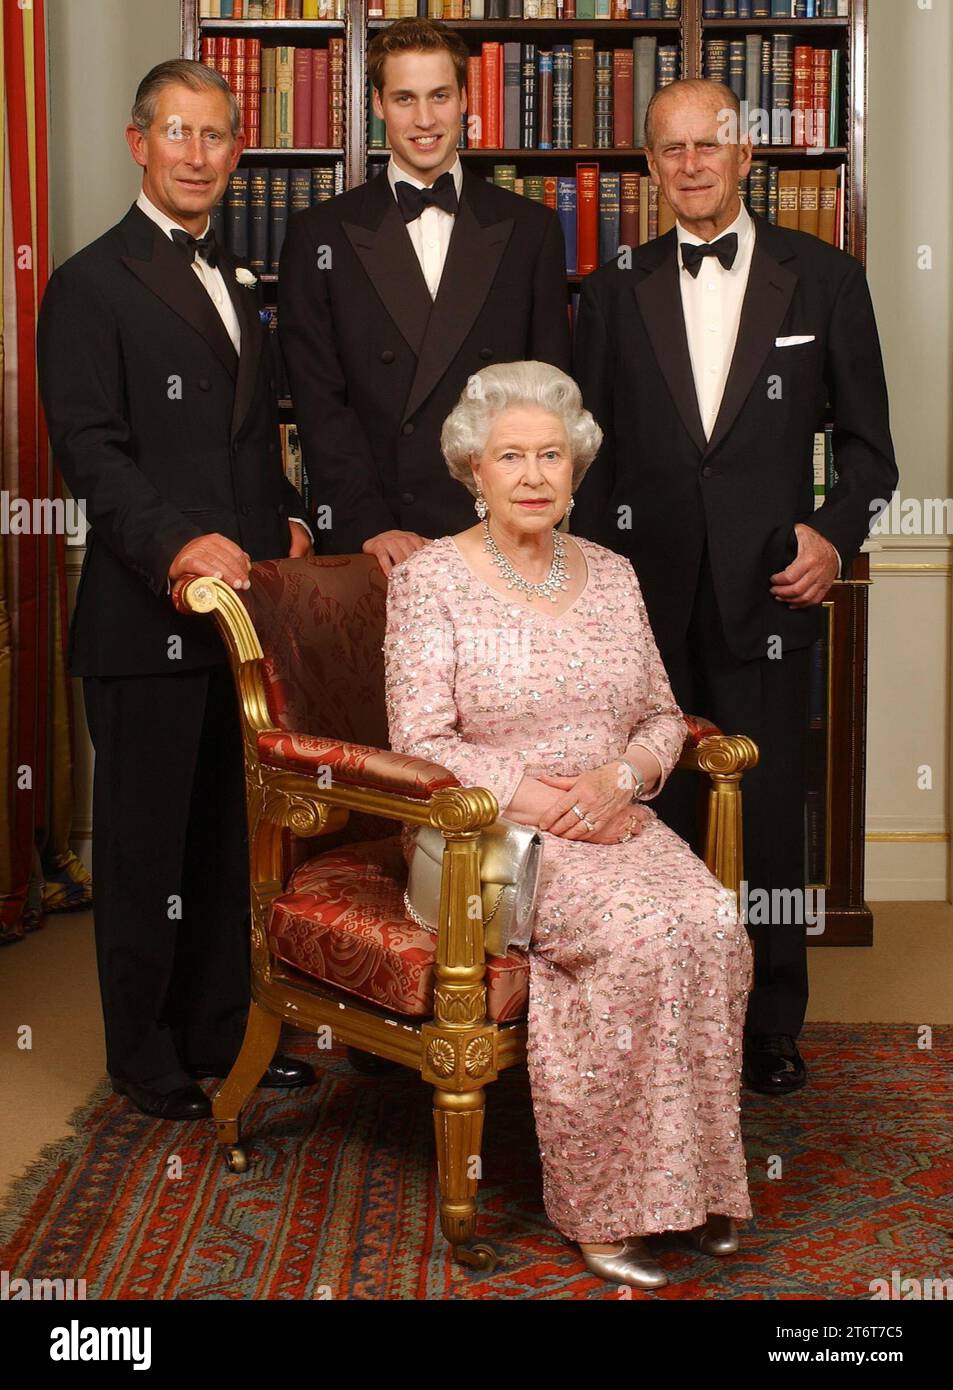 File photo dated 02/06/03 of three generations of the British Royal family - Queen Elizabeth II and her husband, the Duke of Edinburgh, their oldest son, the Prince of Wales, and his oldest son, Prince William, at Clarence House in London before a dinner to mark the 50th anniversary of her Coronation. Photos from every year of the King's life have been compiled by the PA news agency to celebrate King Charles III's 75th birthday. Issue date: Sunday November 12, 2023. Stock Photo